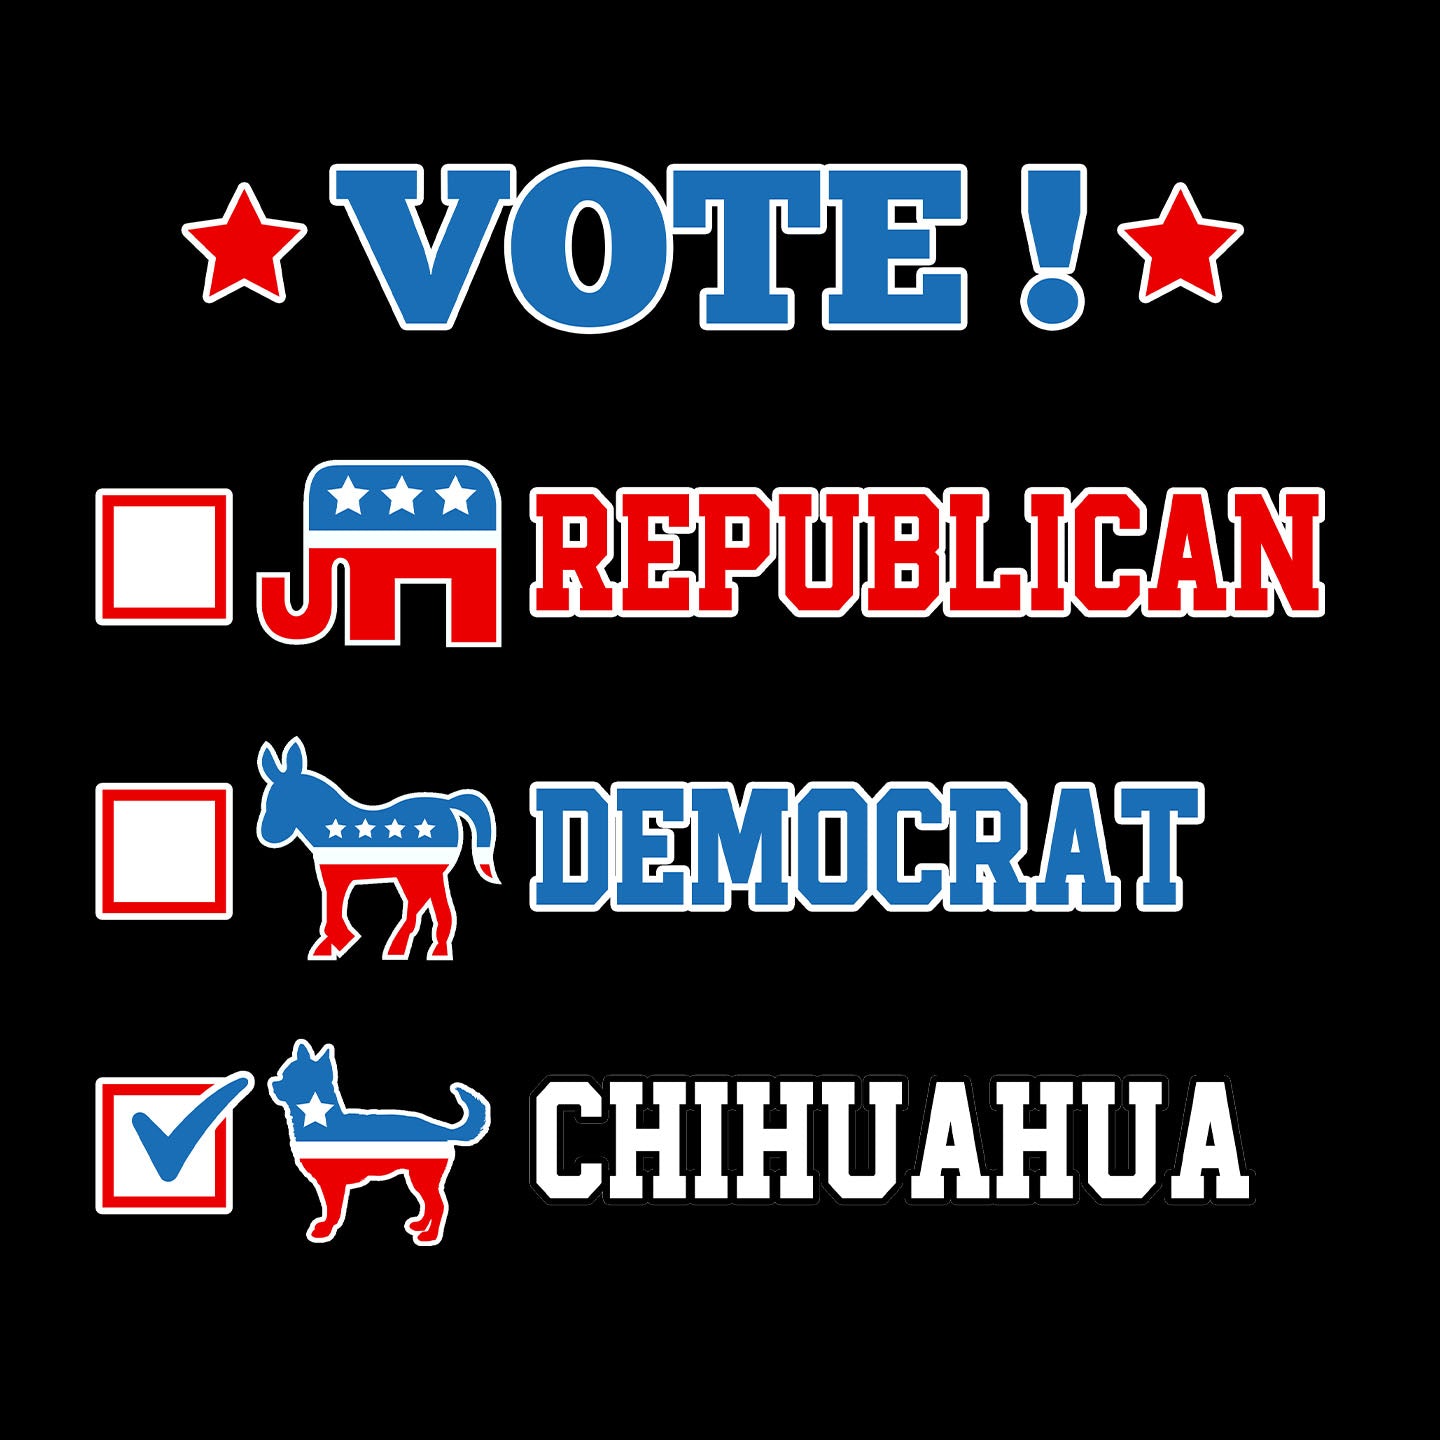 Vote for the Chihuahua (Short-Haired) - Adult Unisex T-Shirt